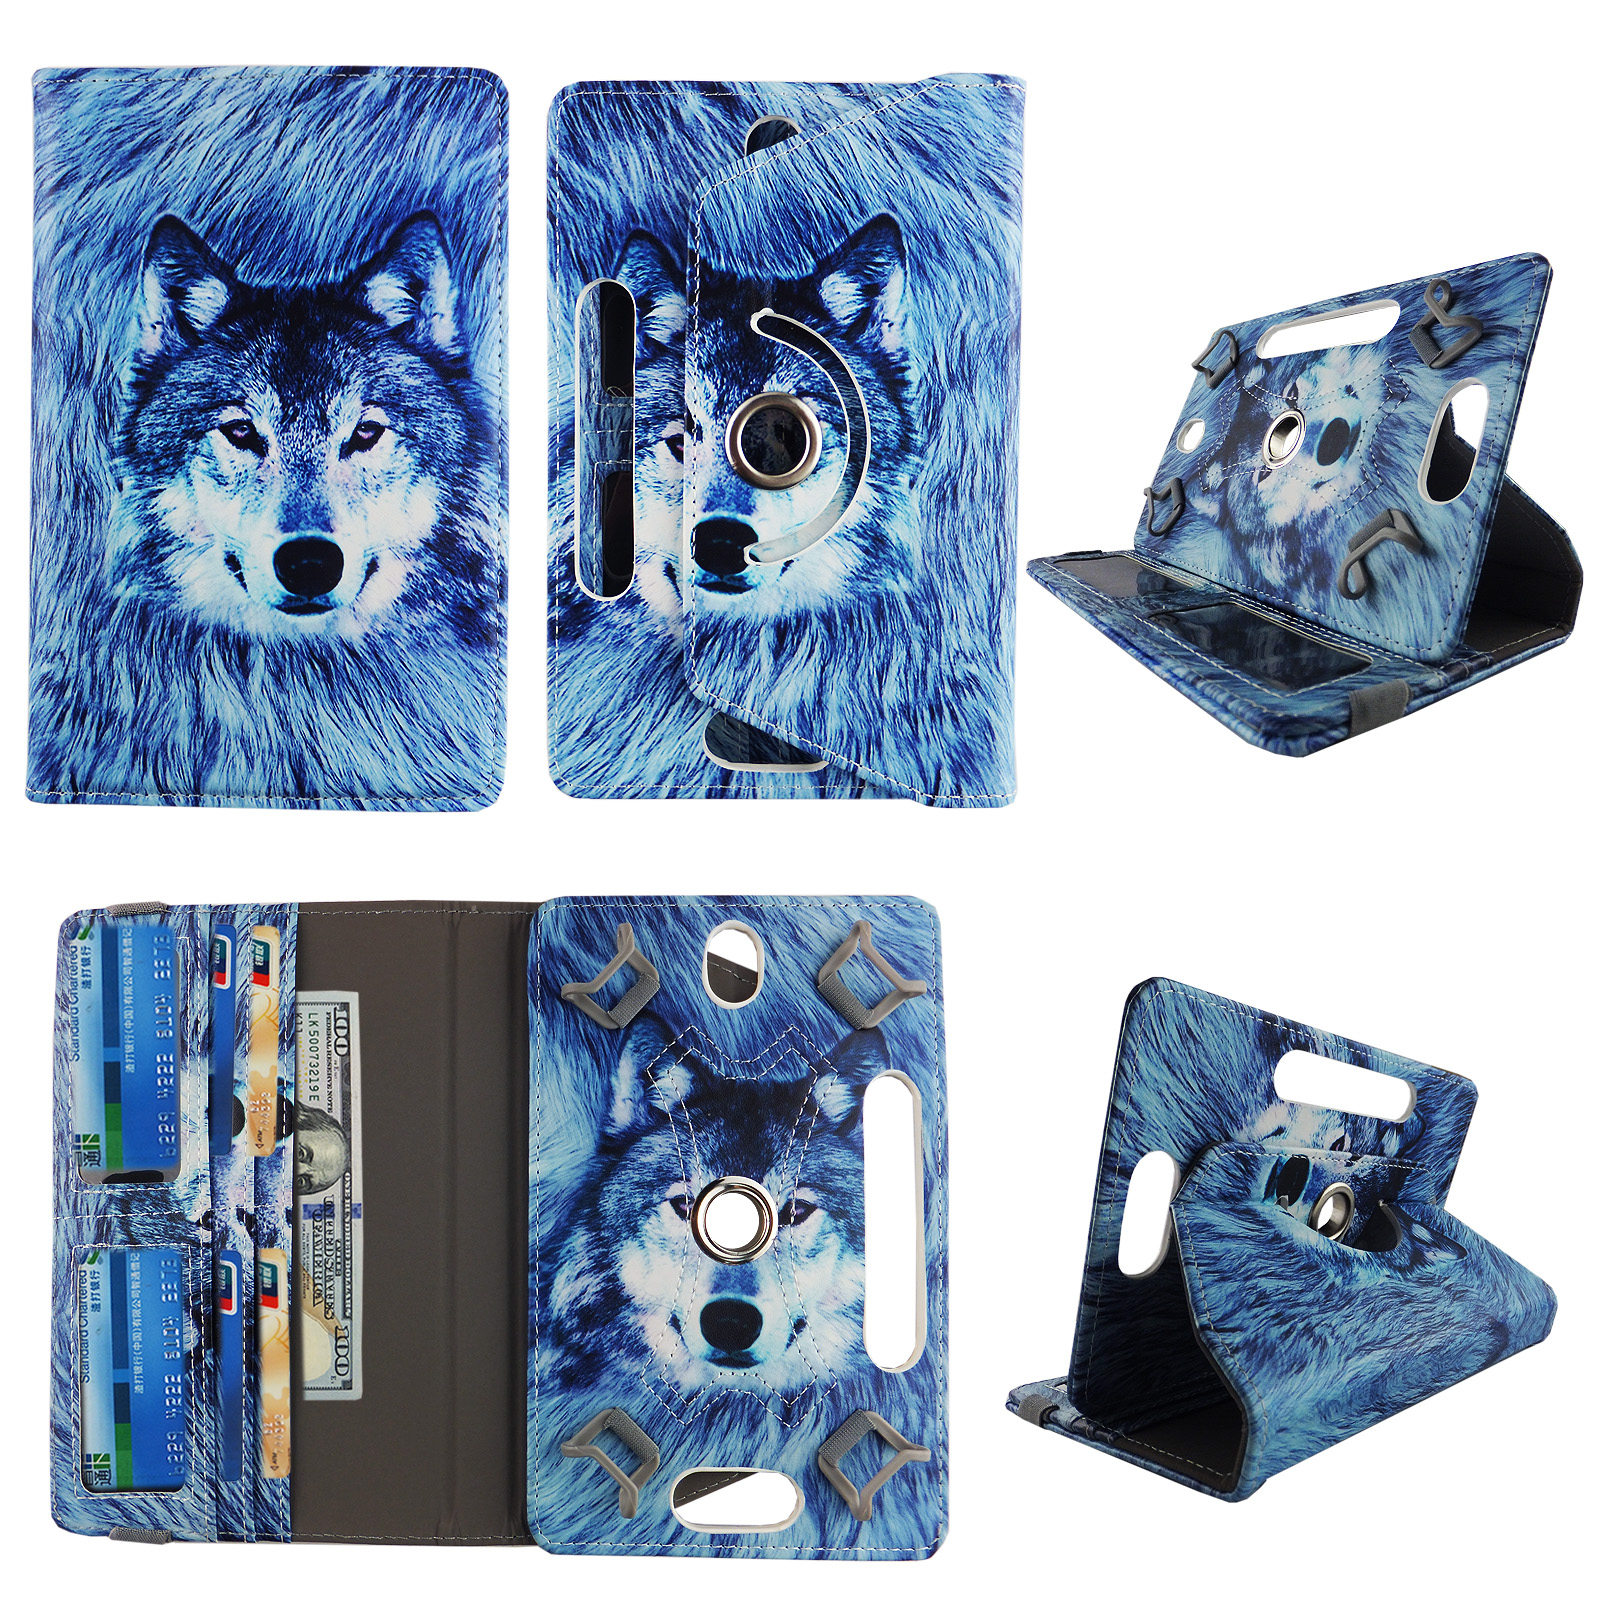 Wallet style folio tablet for Sony Xperia Z10  case 10 inch Slim fit standing protective rotating for 10" universal carrying cases 10.1 PU leather cash Pocket cover Snow Wolf - image 1 of 2